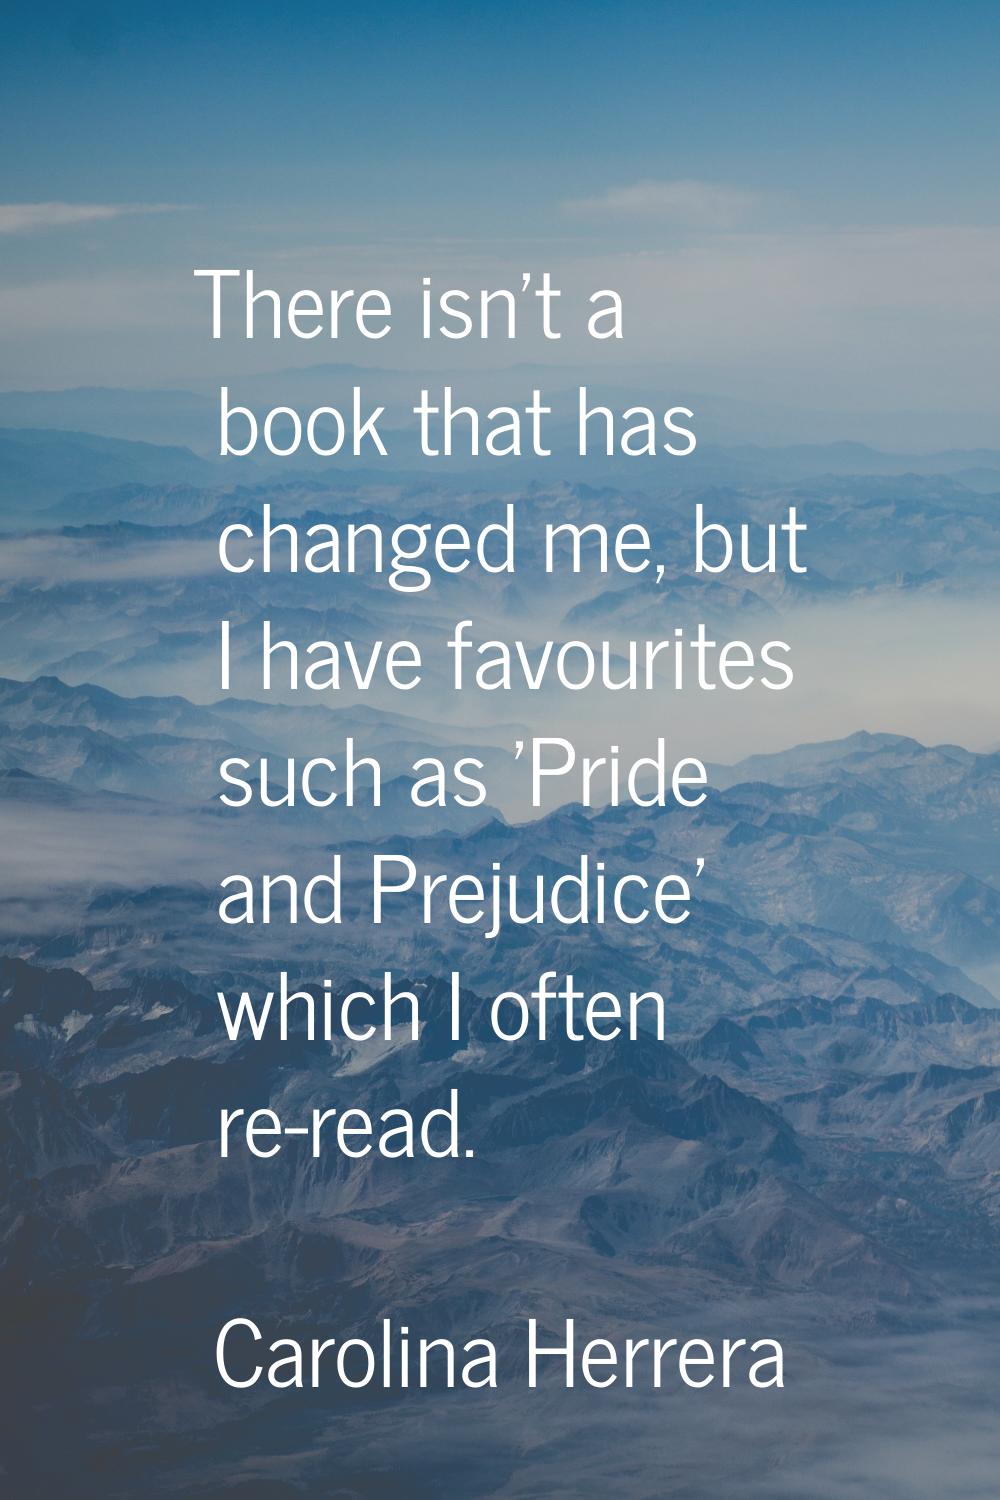 There isn't a book that has changed me, but I have favourites such as 'Pride and Prejudice' which I